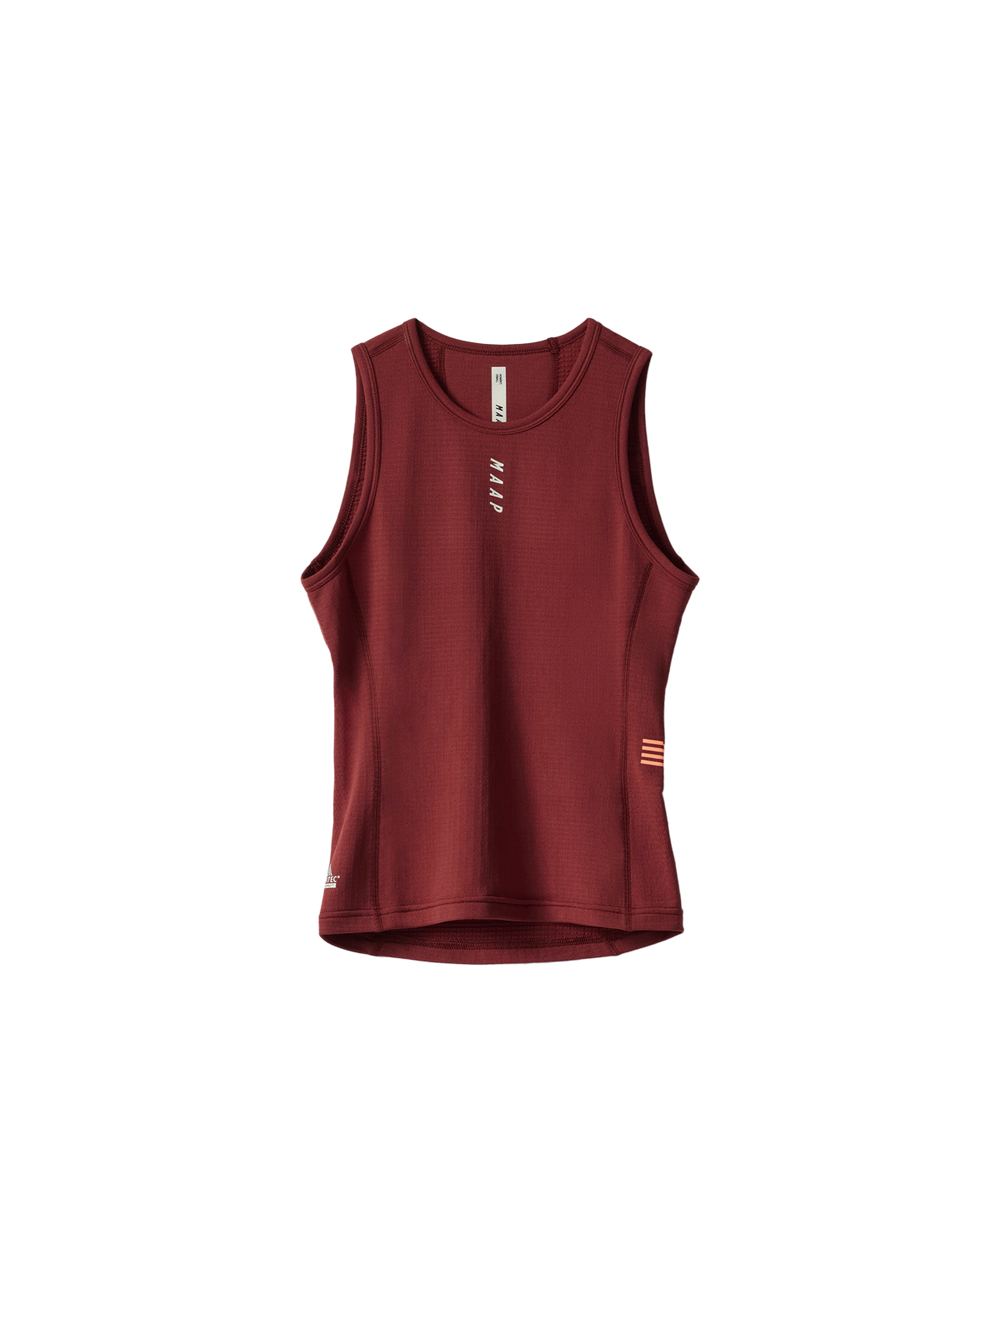 Product Image for Women's Thermal Base Layer Vest